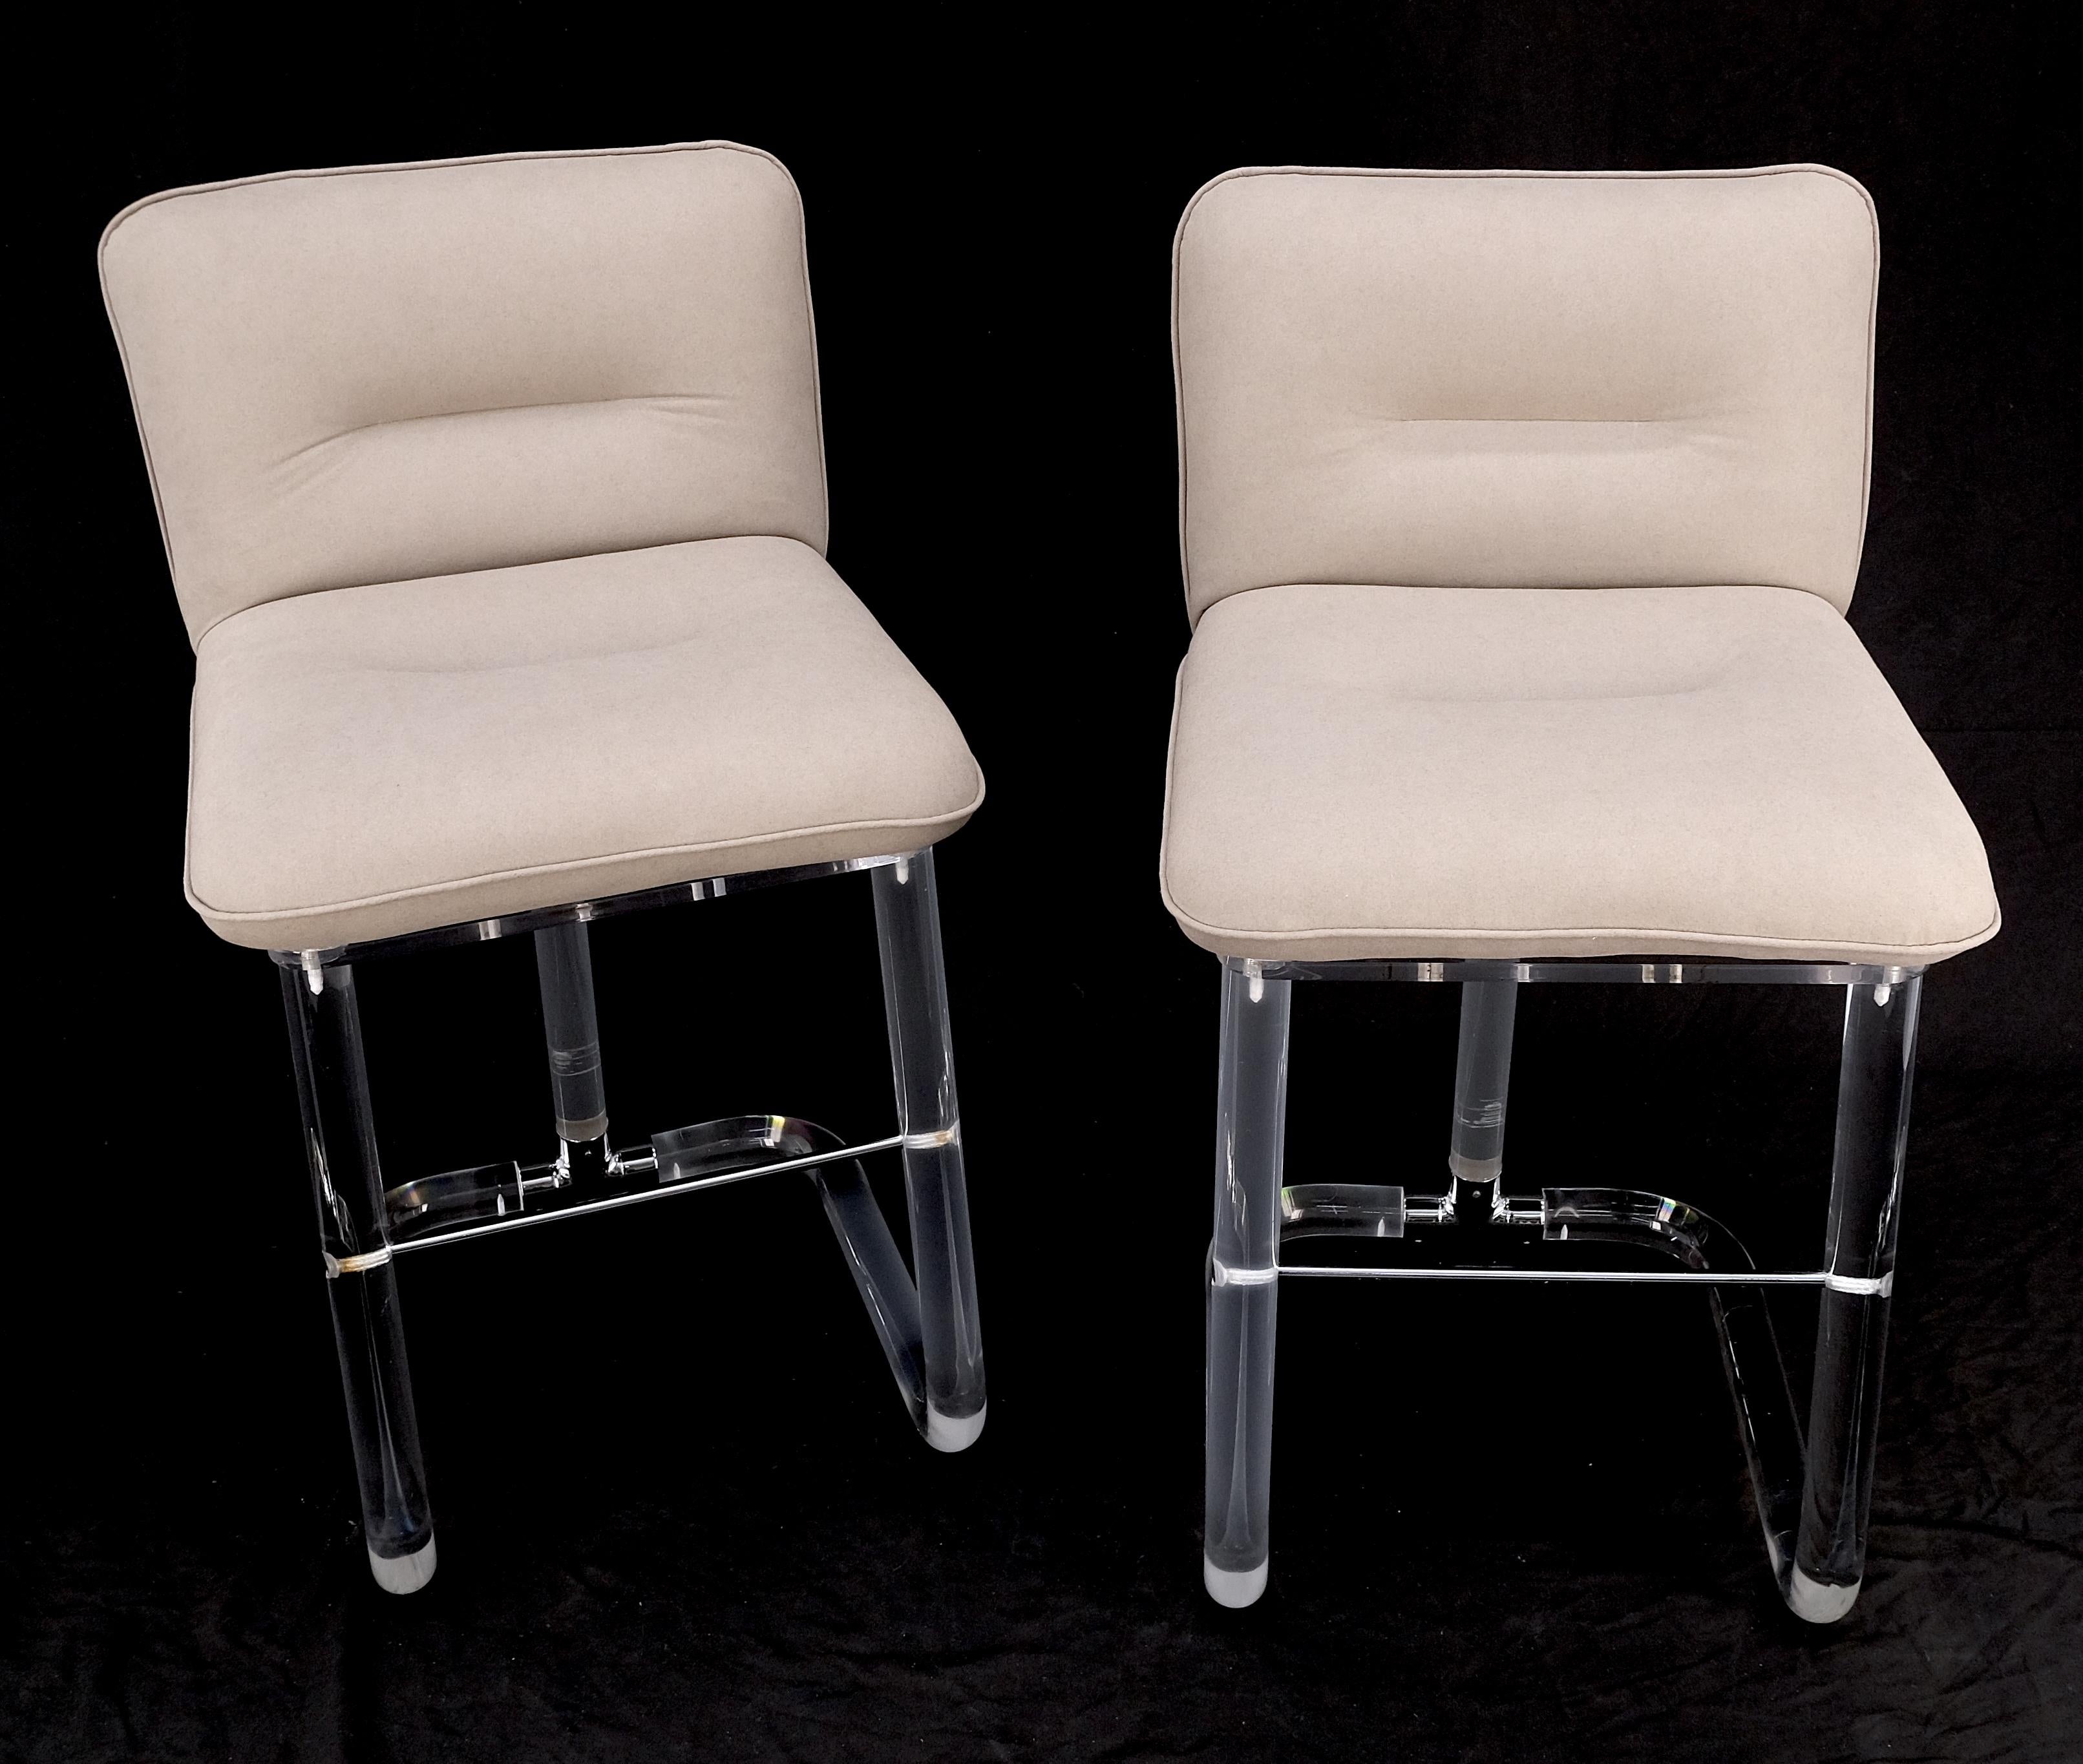 Pair Bent Lucite 1970s New Alcantera Upholstery Swivel Barstool Chairs Chairs  In Good Condition For Sale In Rockaway, NJ